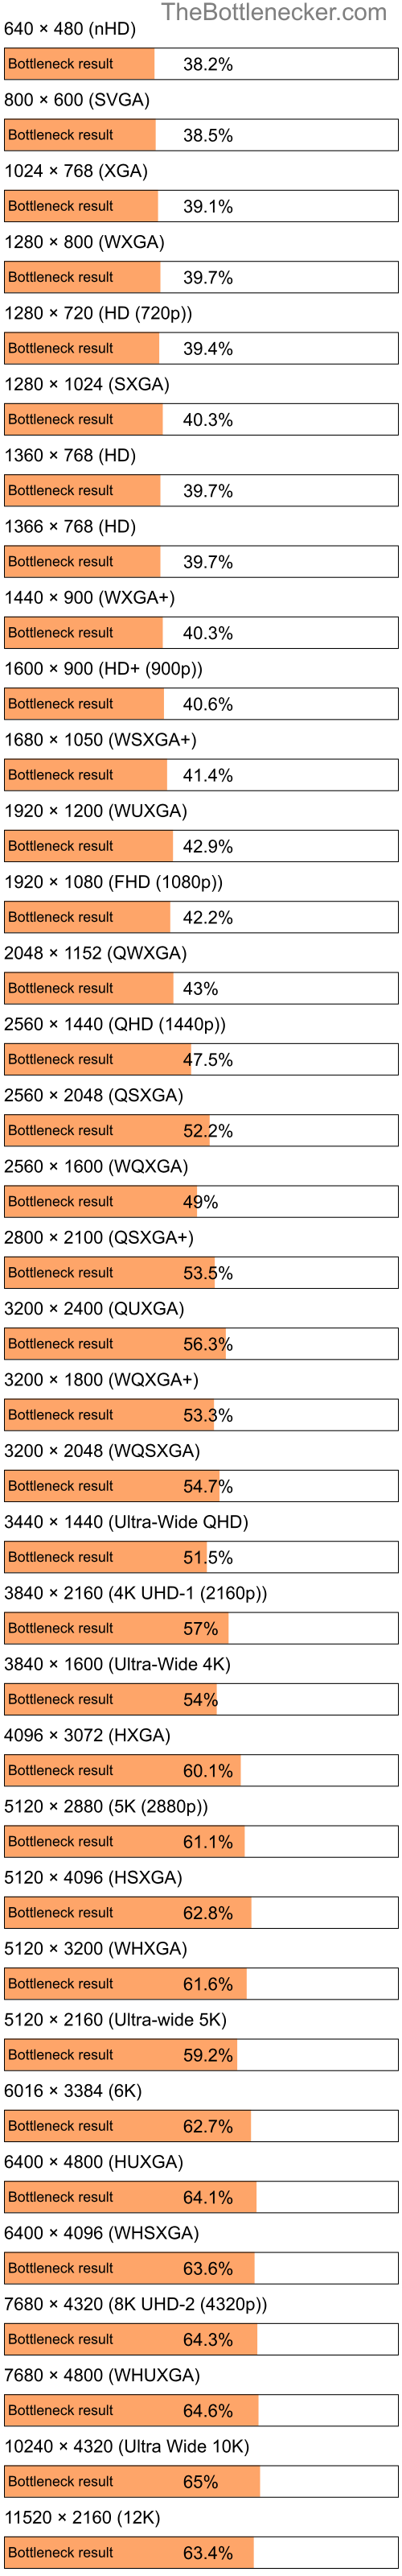 Bottleneck results by resolution for AMD Ryzen Threadripper PRO 7975WX and NVIDIA GeForce GTX 1650 in General Tasks